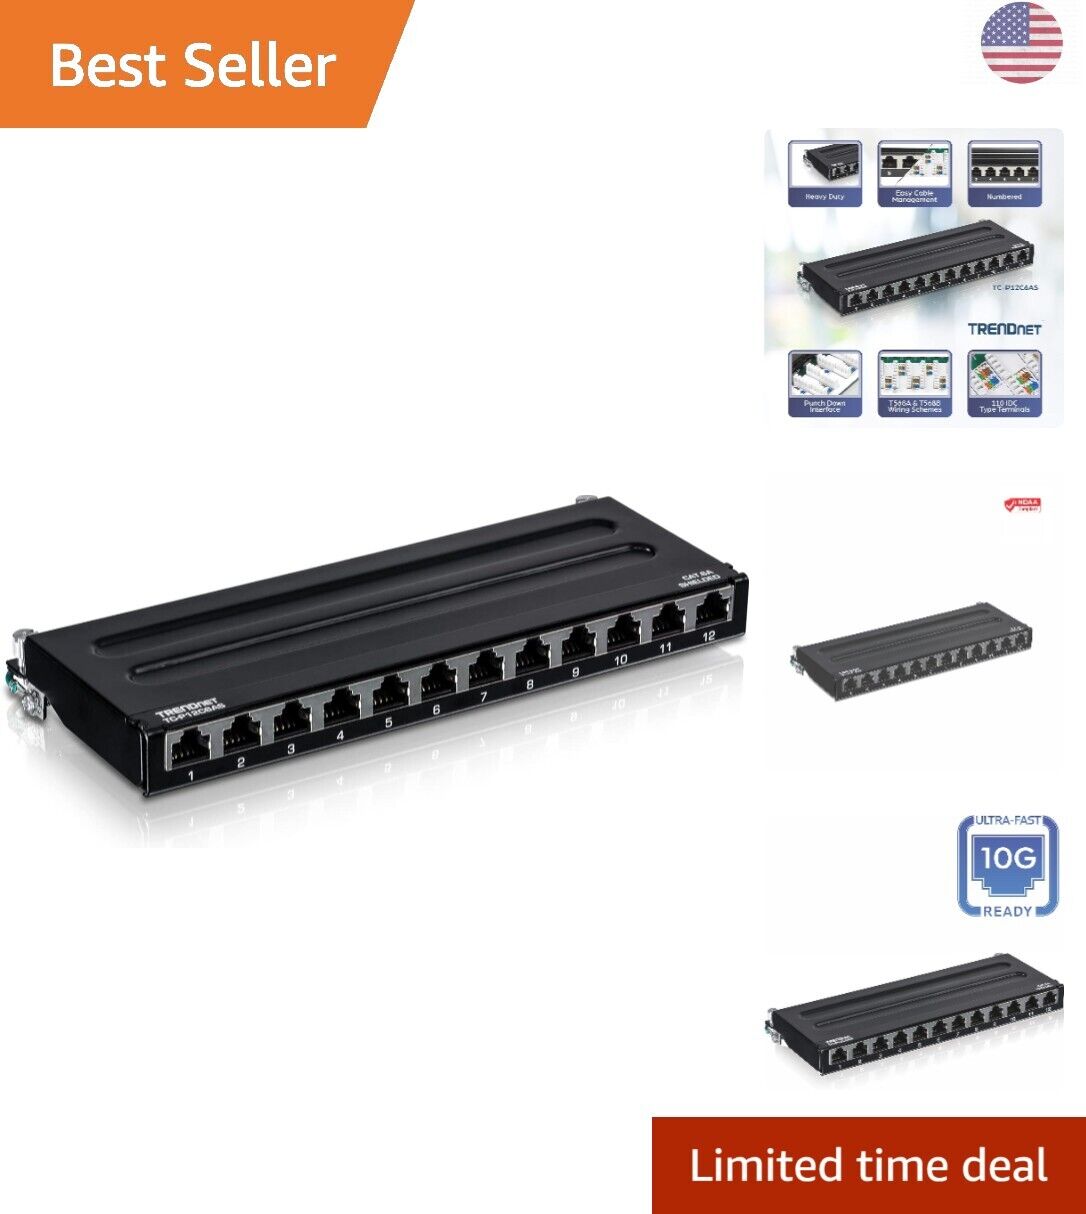 High-Performance Cat6A Patch Panel - 10G Ready - Metal Housing - Management